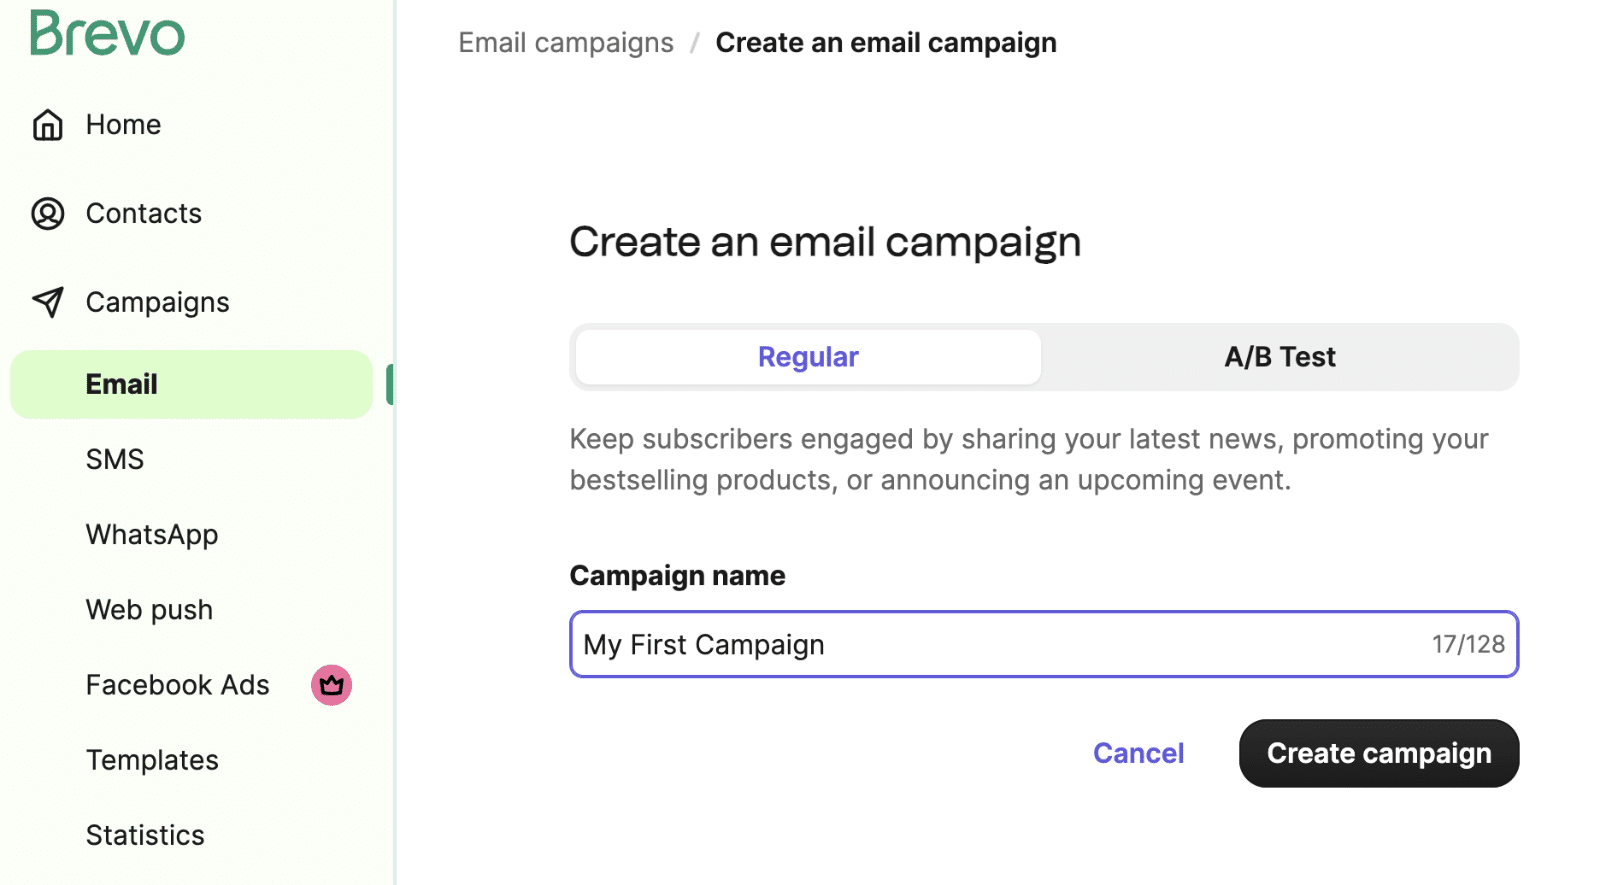 Creating a new email campaign in Brevo